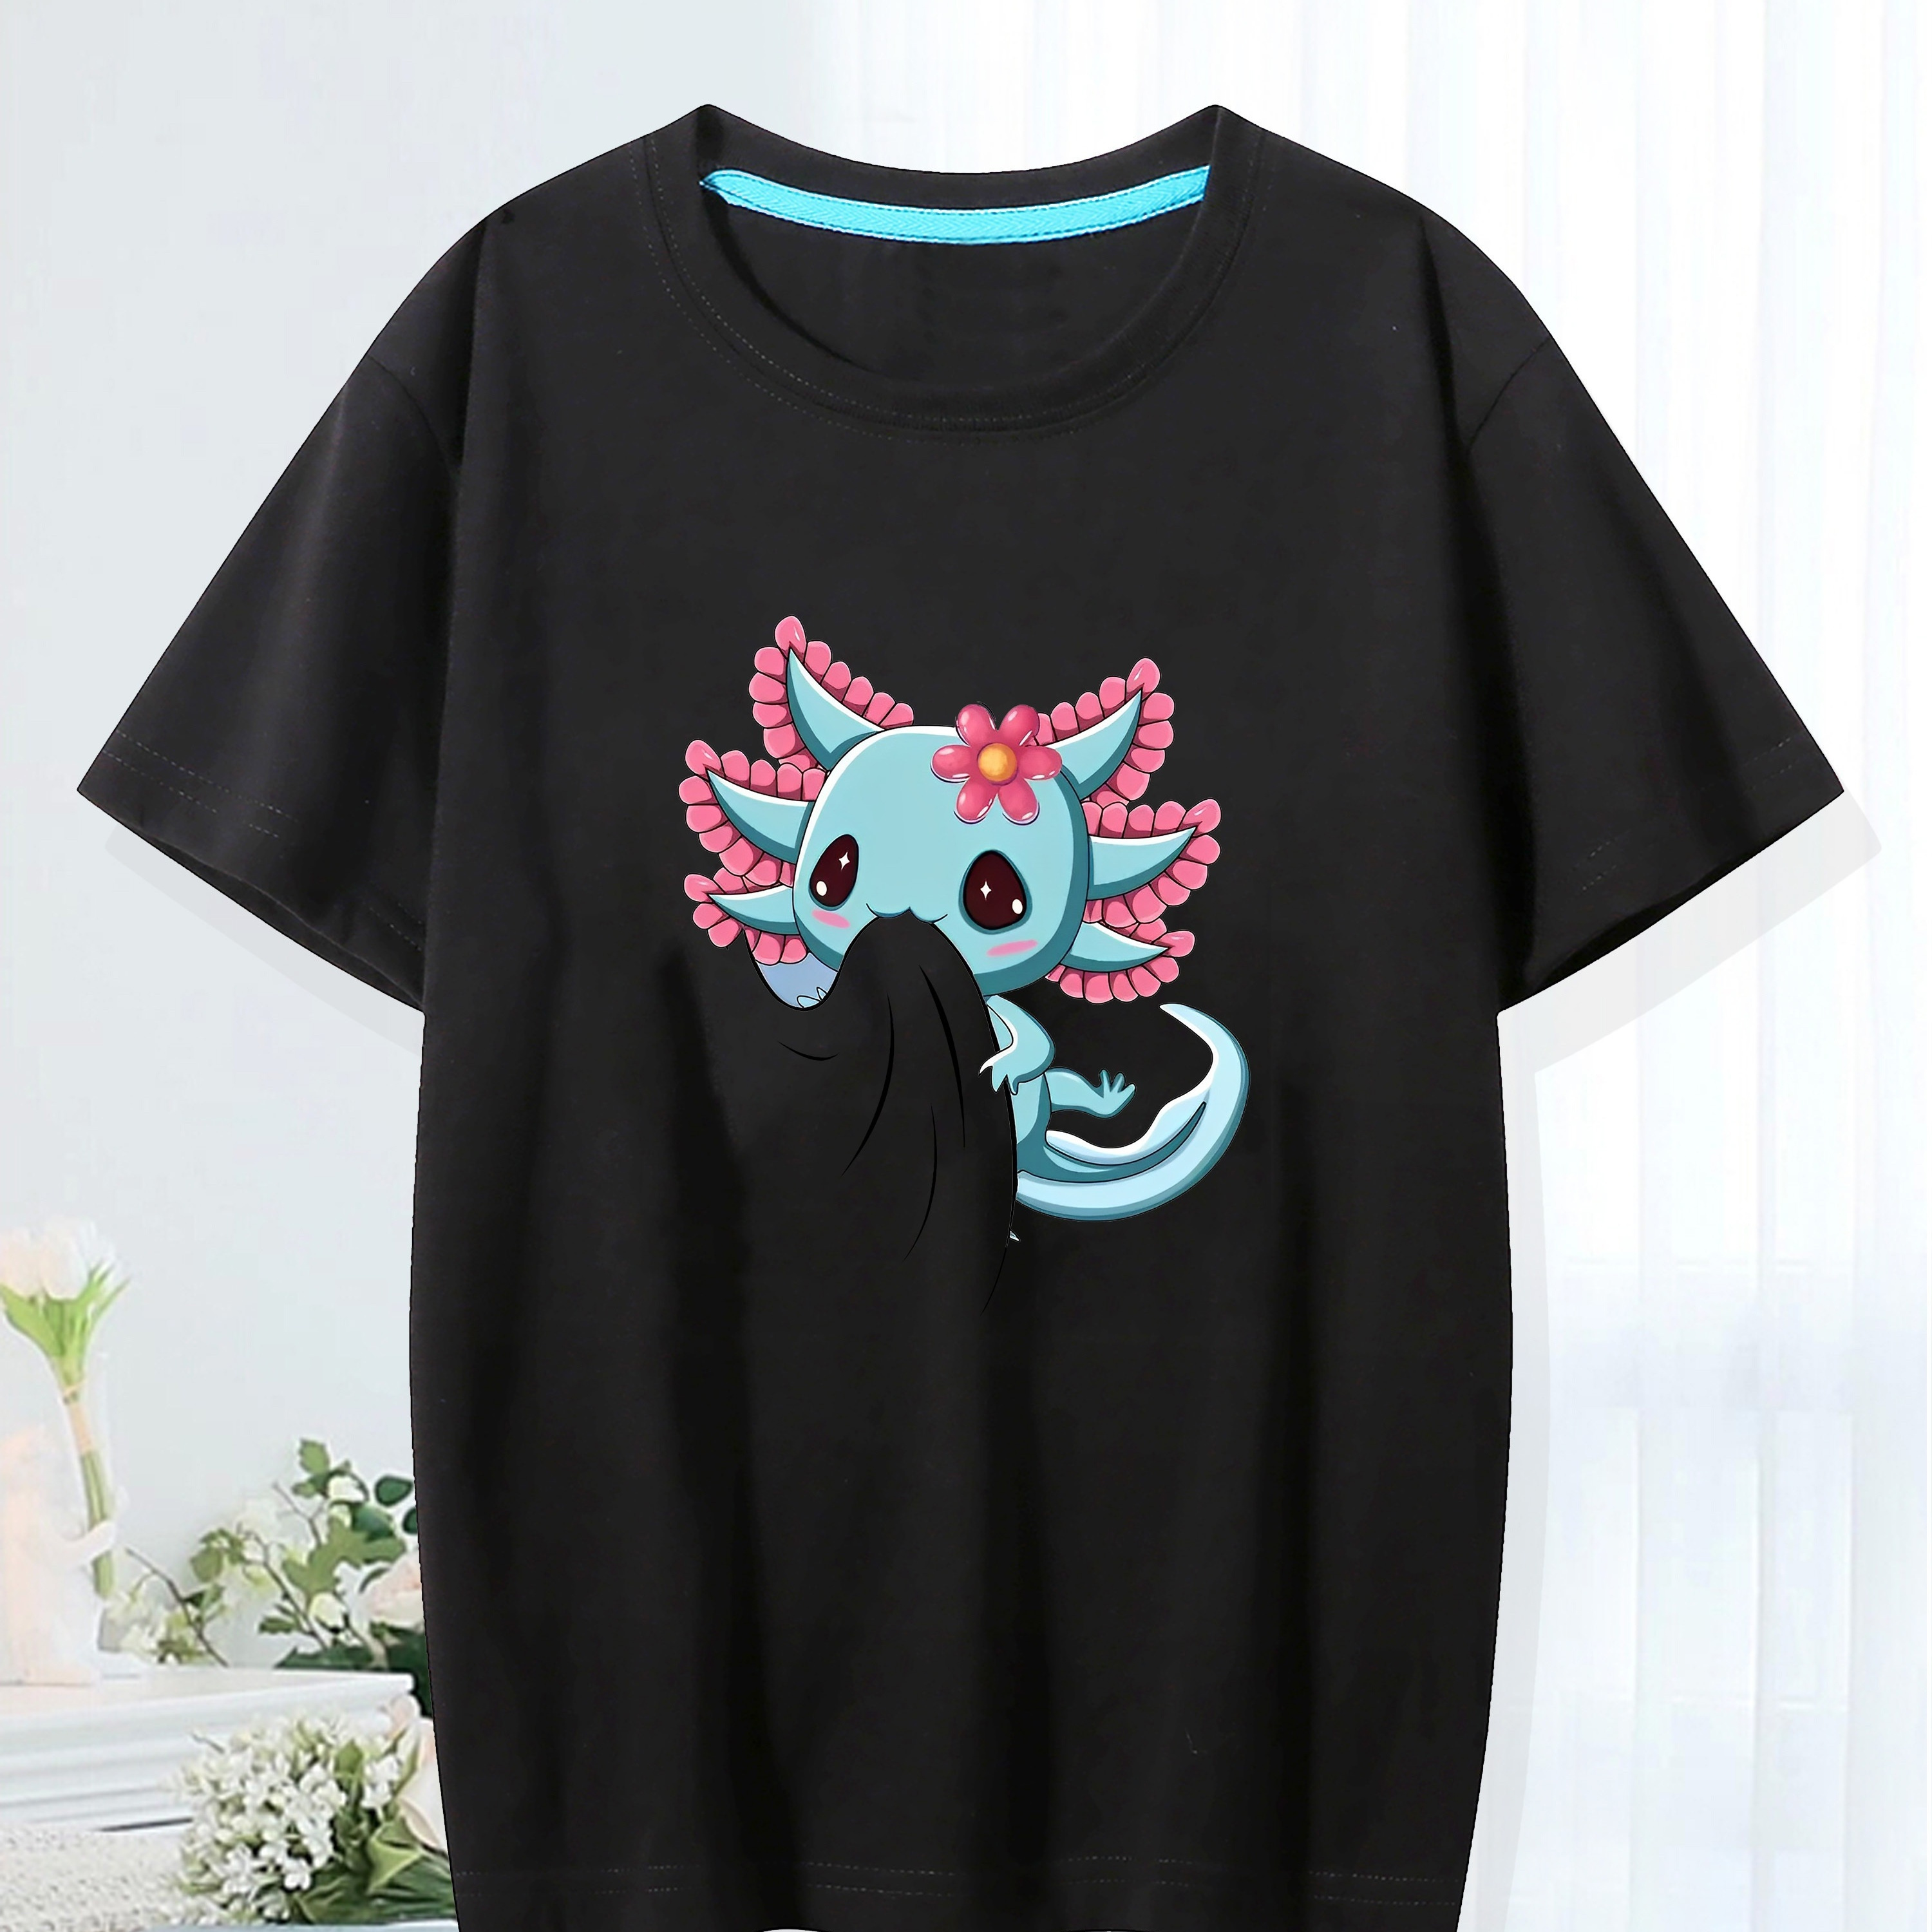 

Cute Cartoon Axolotl Graphic Print For Girls, Comfy And Fit T-shirt Top Pullover For Summer For Outdoor Activities